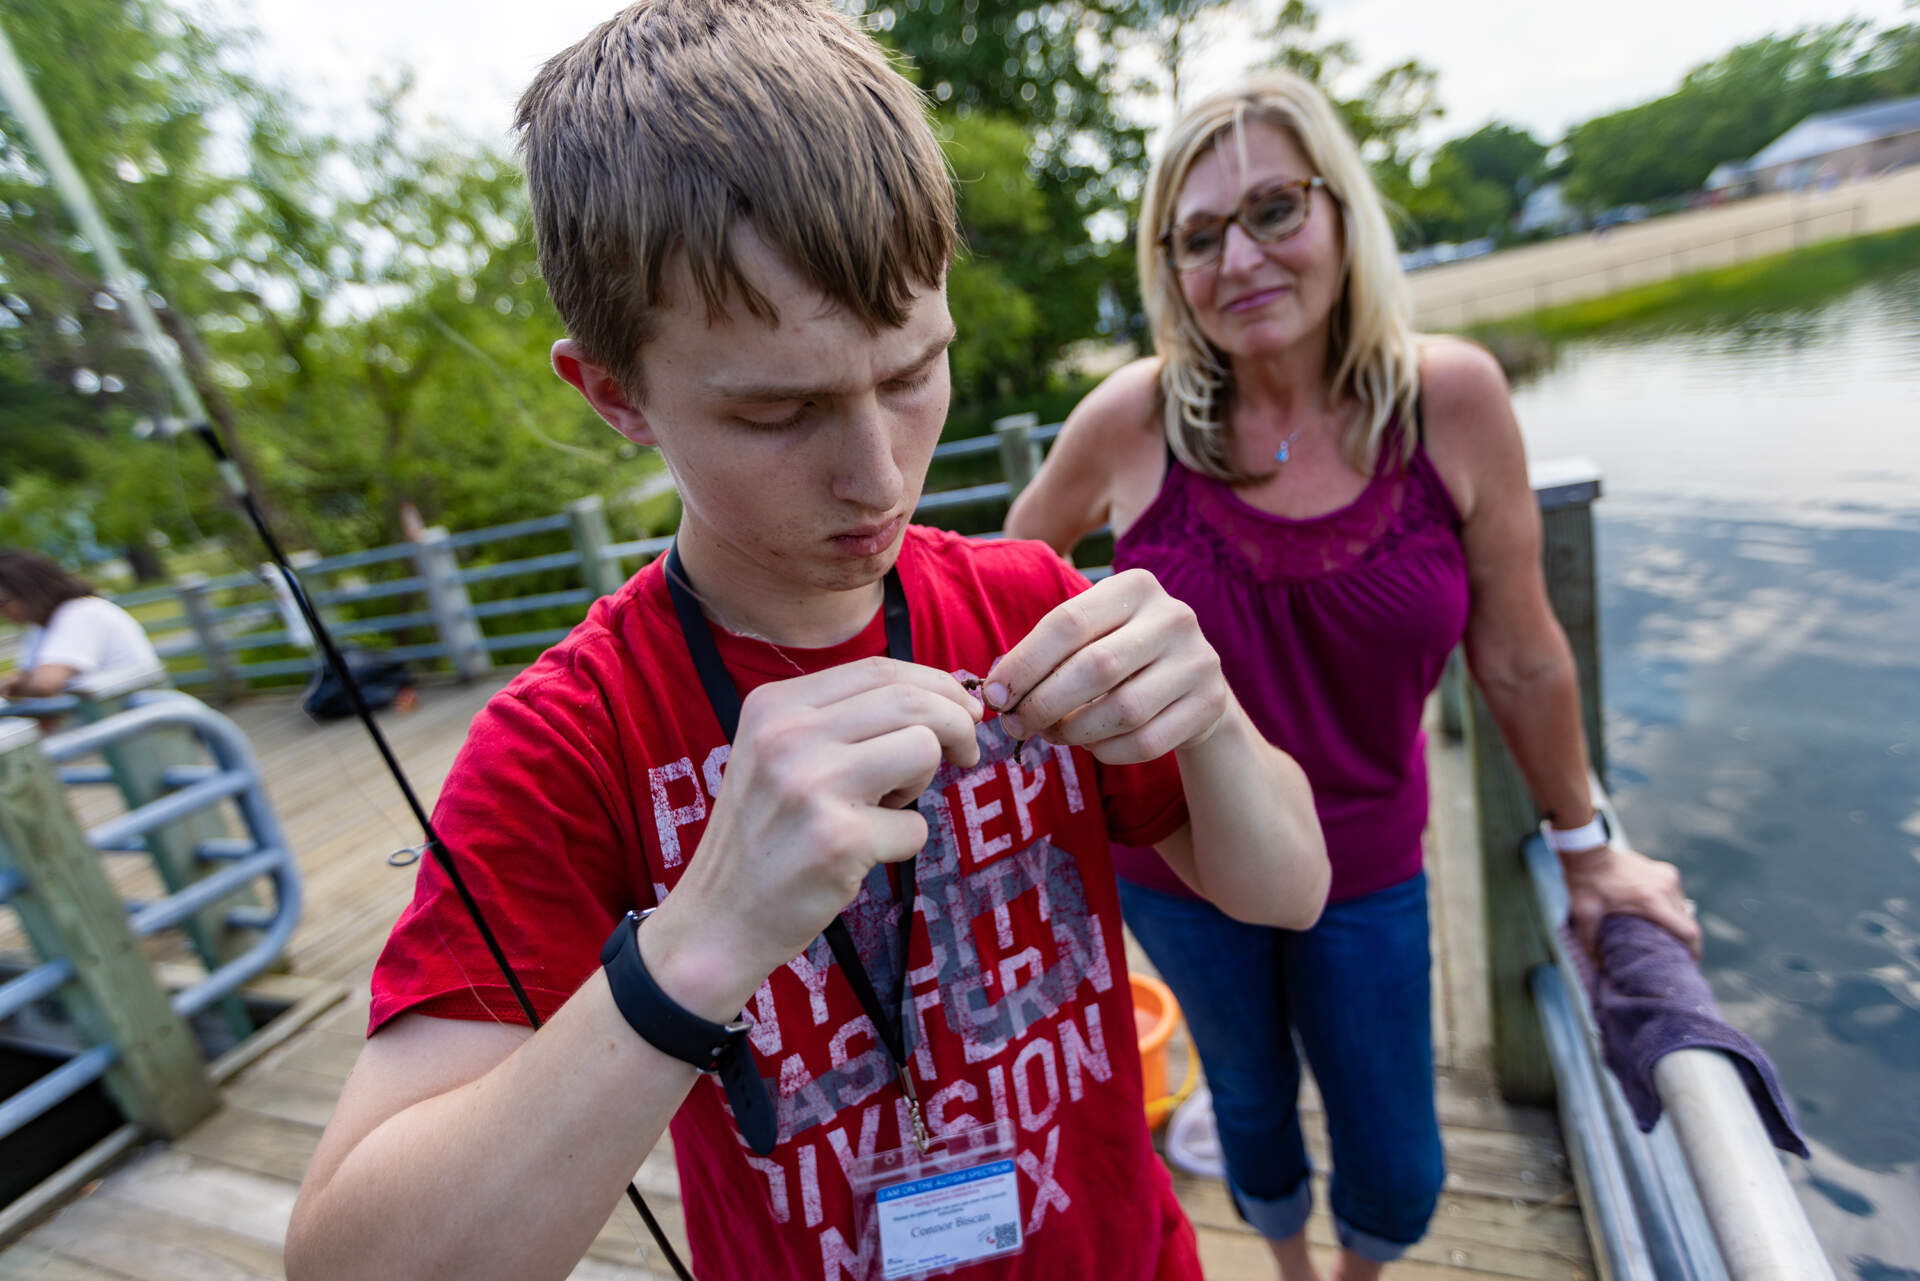 Roberta Biscan watches as her son Connor works to bait a fishing hook on the pier at Silver Lake. (Jesse Costa/WBUR)